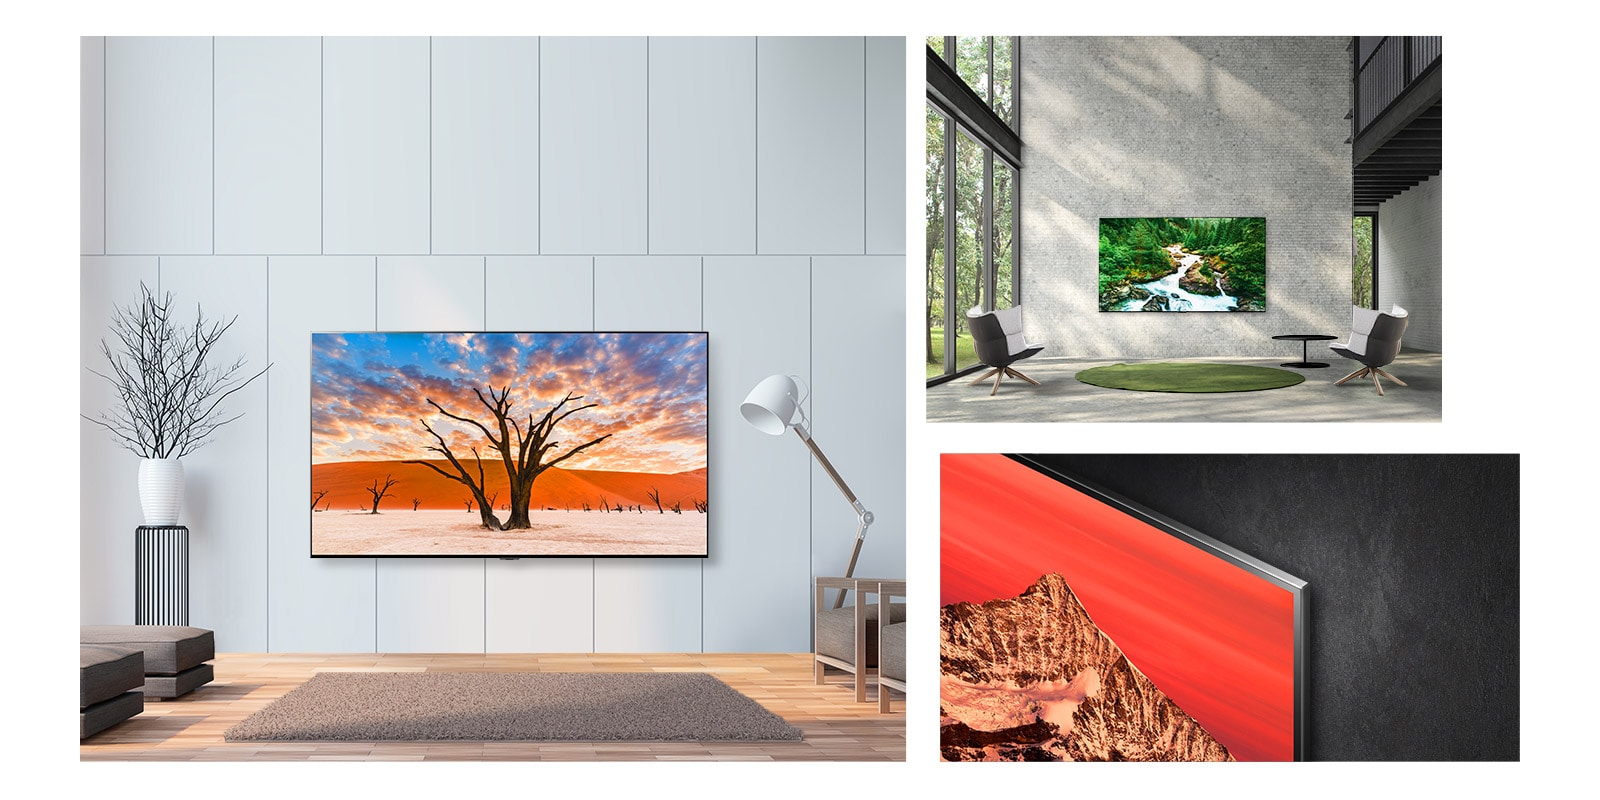 Three scenes of the slim and large LG QNED Mini LED hung artfully on a wall.